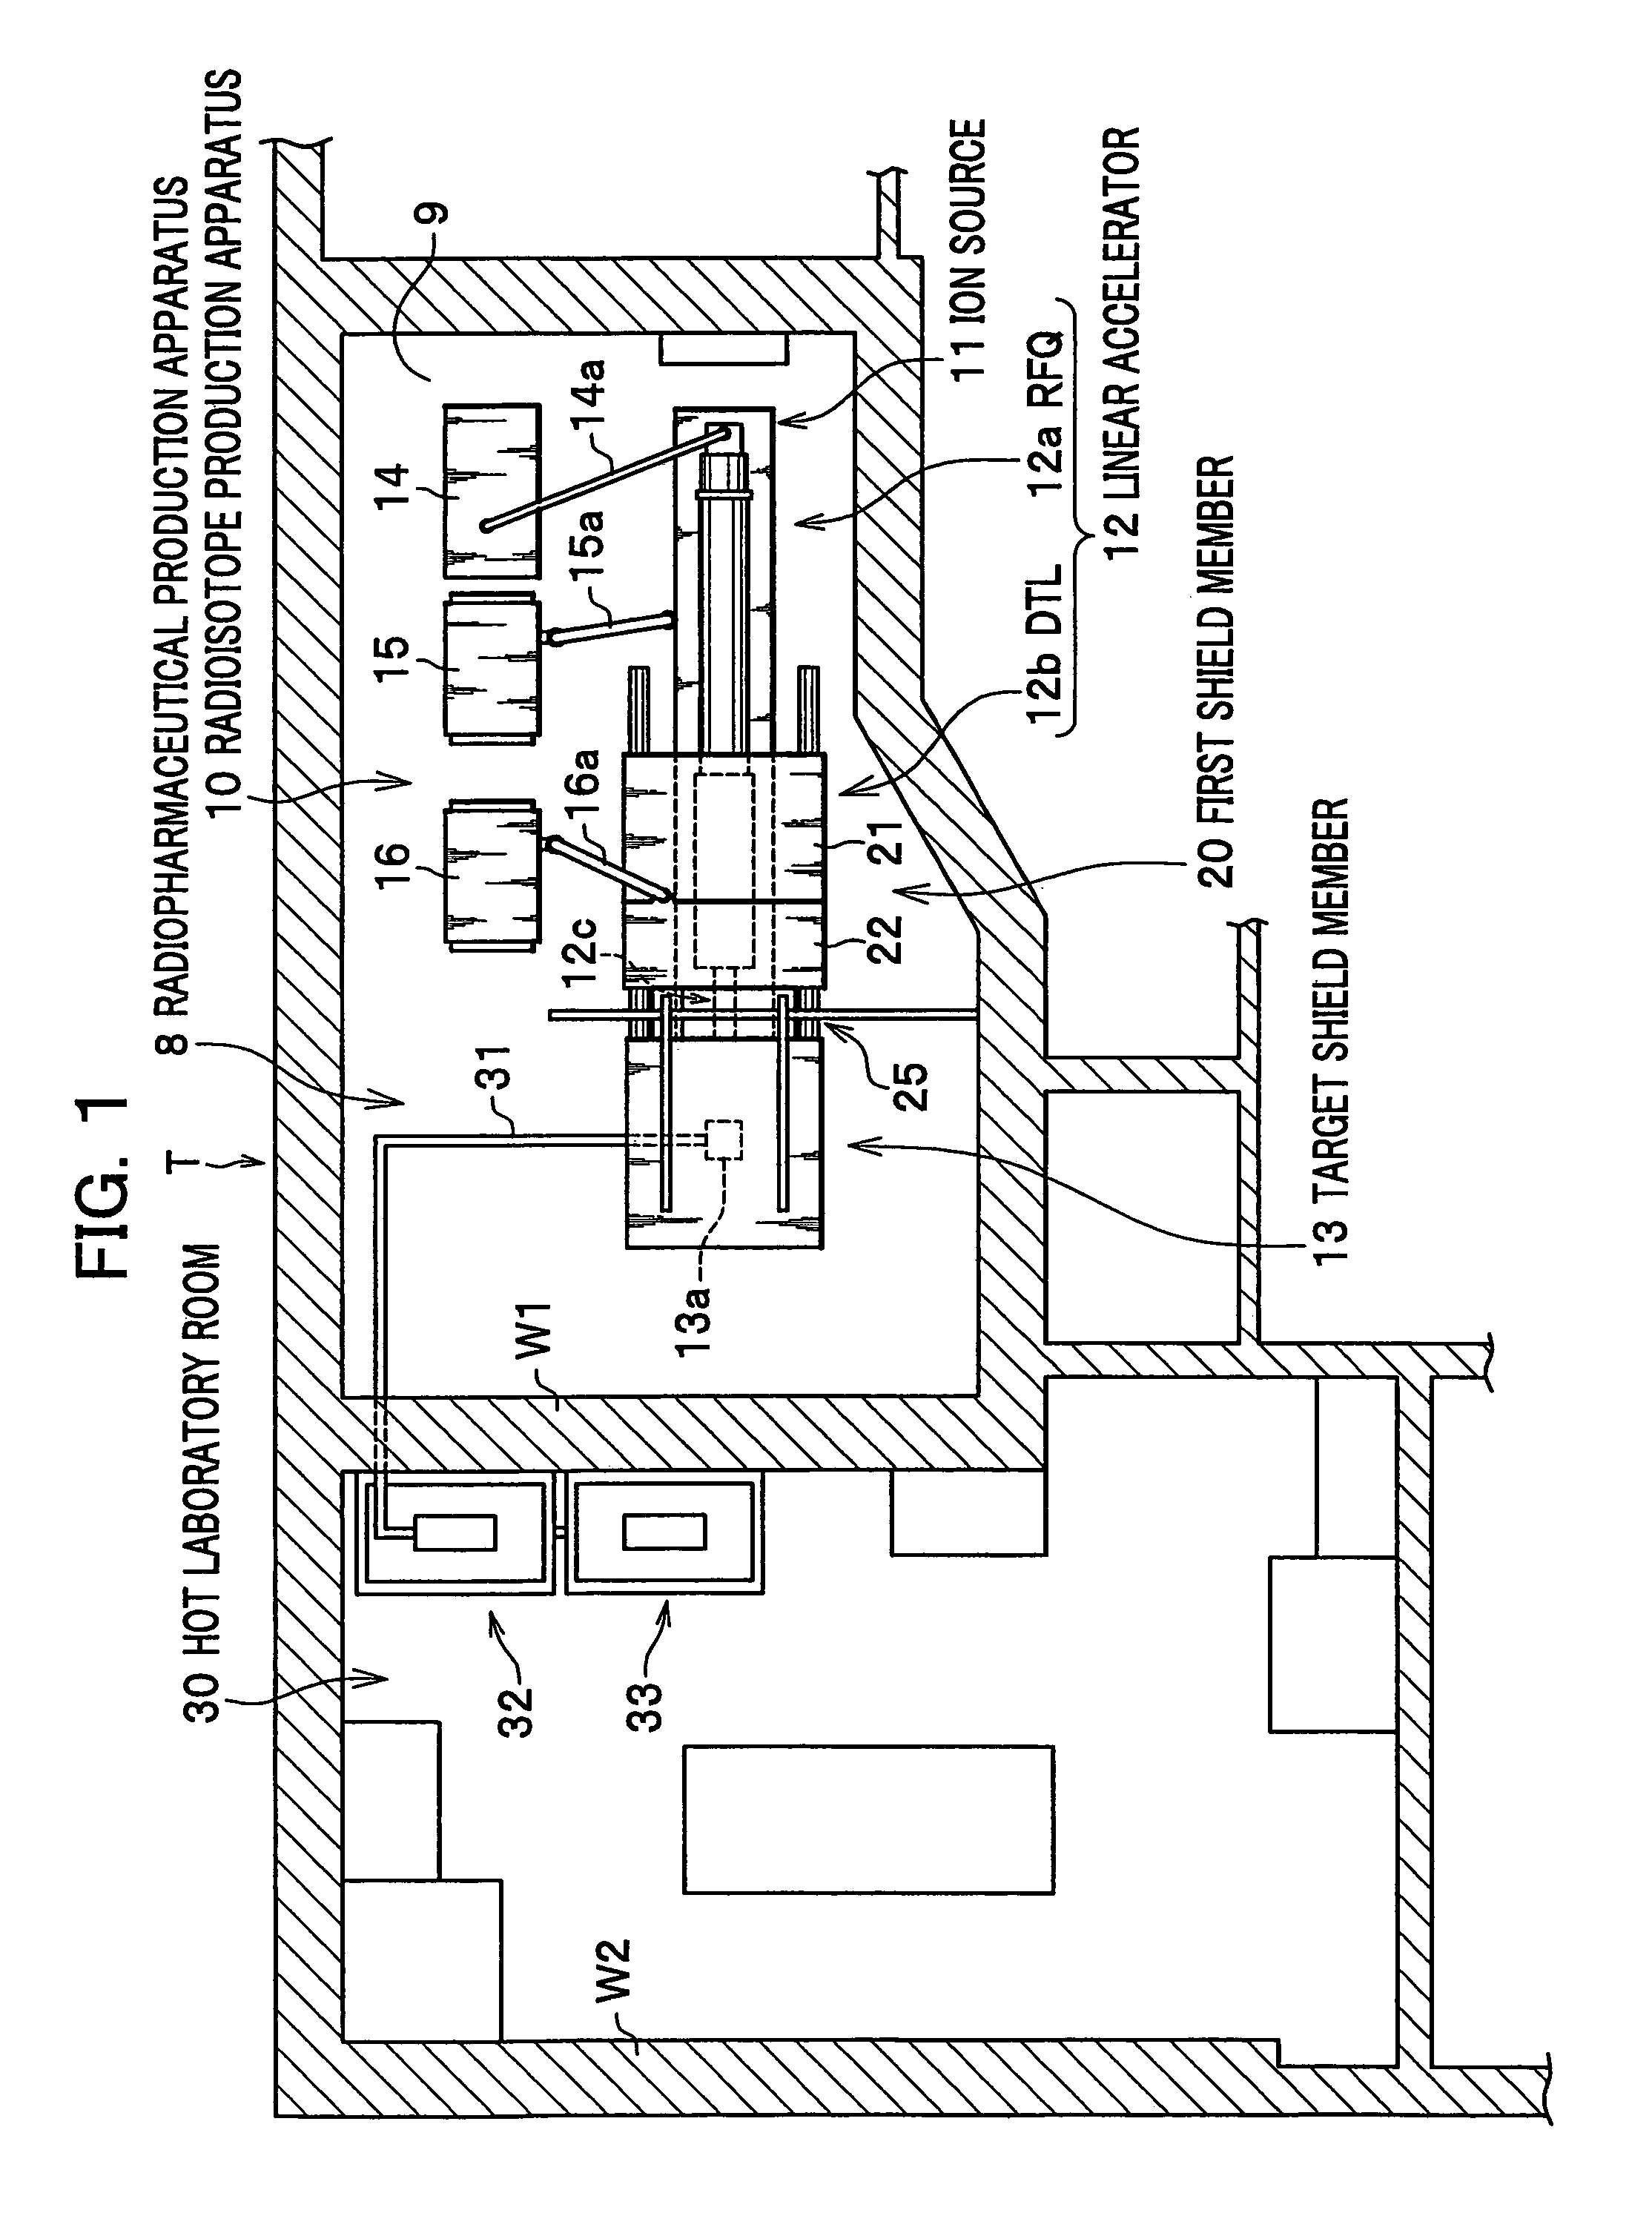 Radioisotope production apparatus and radiopharmaceutical production apparatus